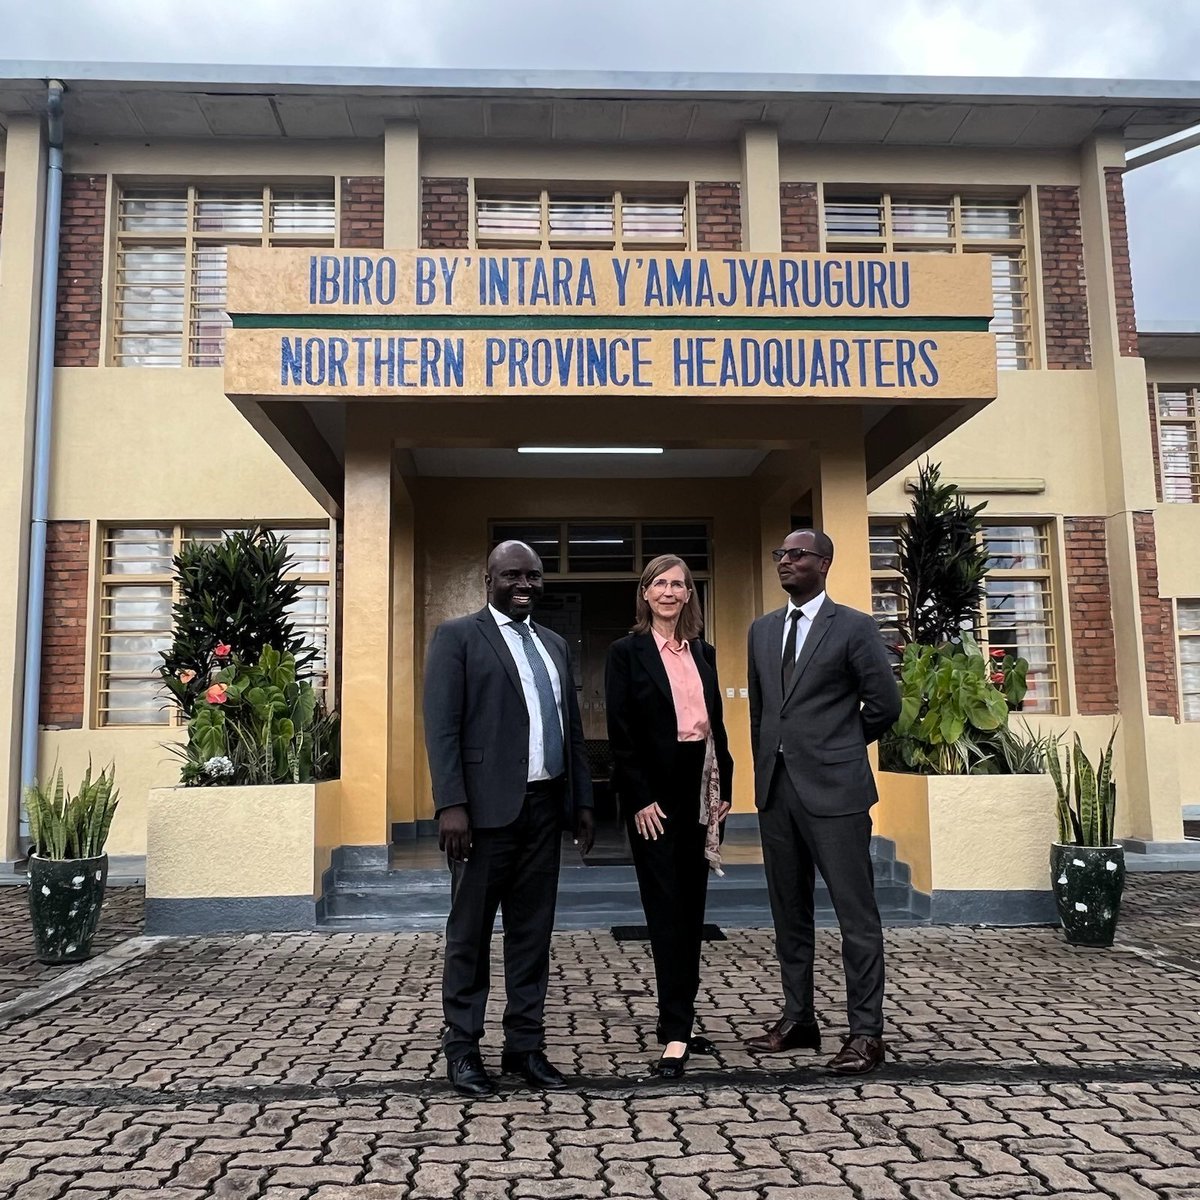 After attending the 9th graduation ceremony of @Uni_Rwanda in Musanze, the German Ambassador met with the Governor of Northern Province @gahundemaurice Thank you for the warm welcome and the insightful exchange.